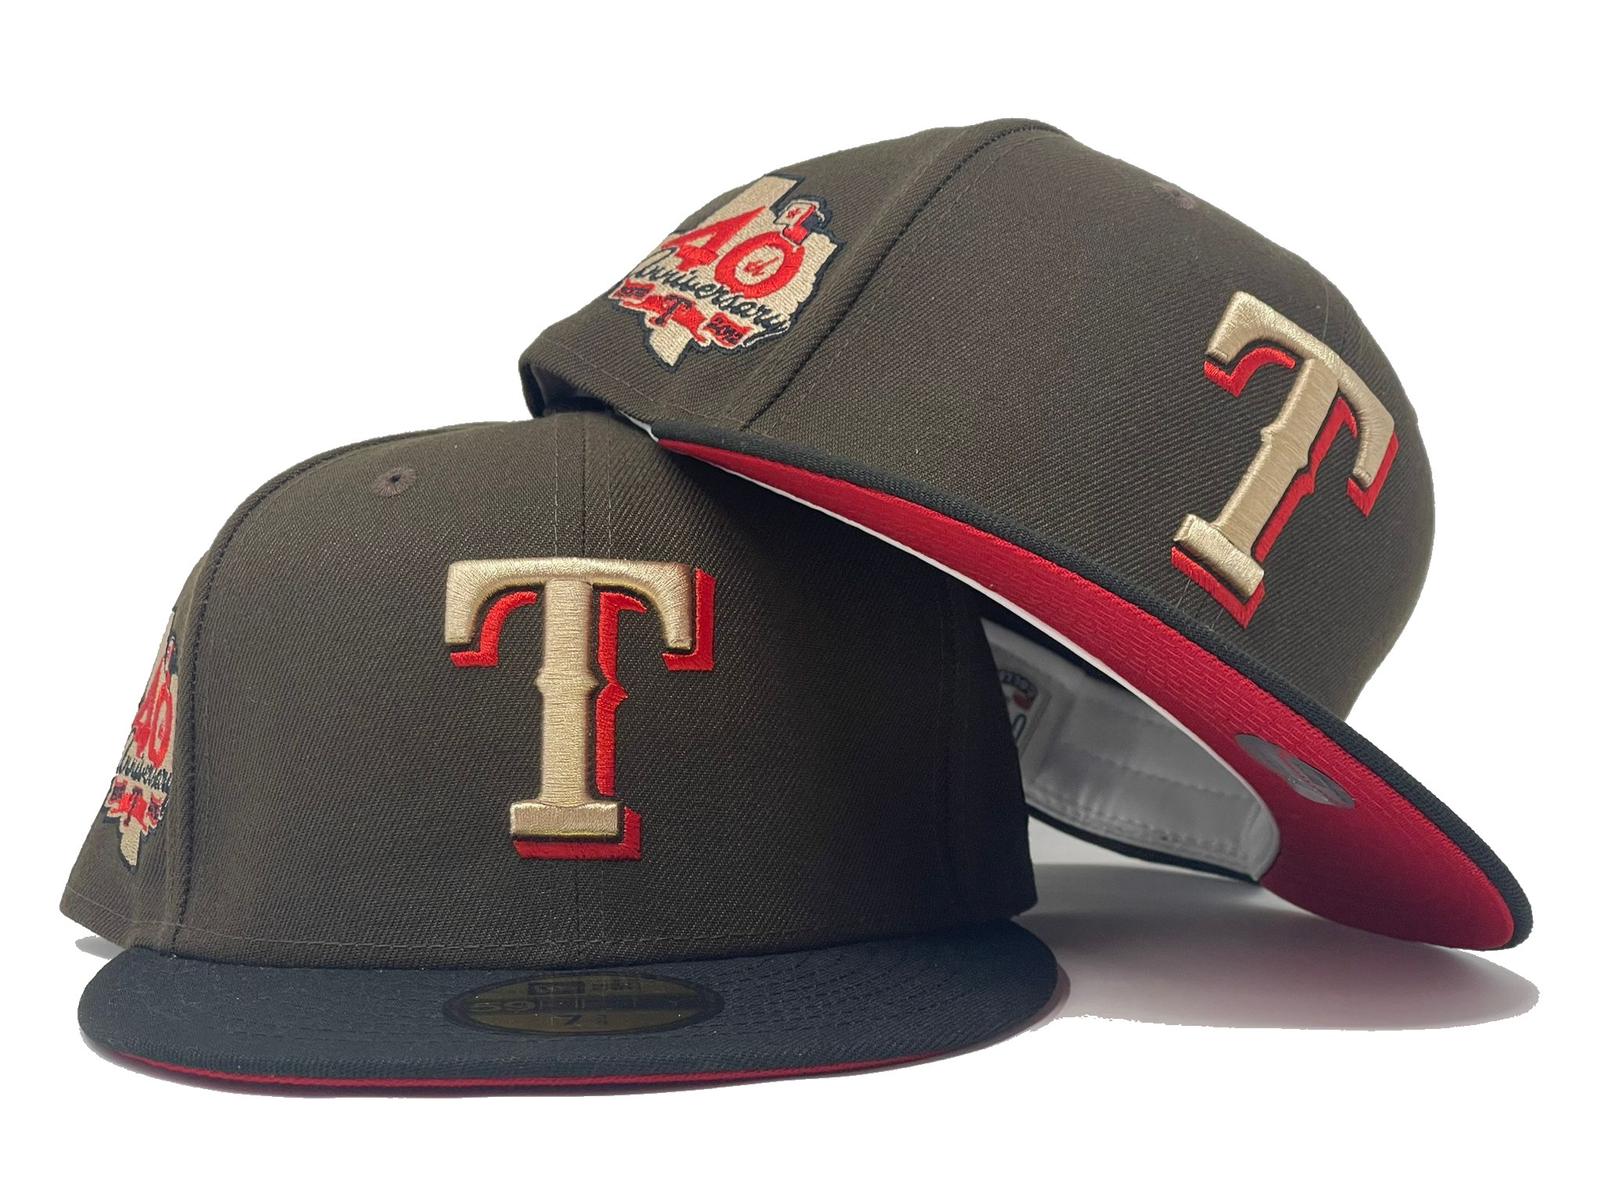 TEXAS RANGERS 40TH ANNIVERSARY RED BRIM NEW ERA FITTED HAT